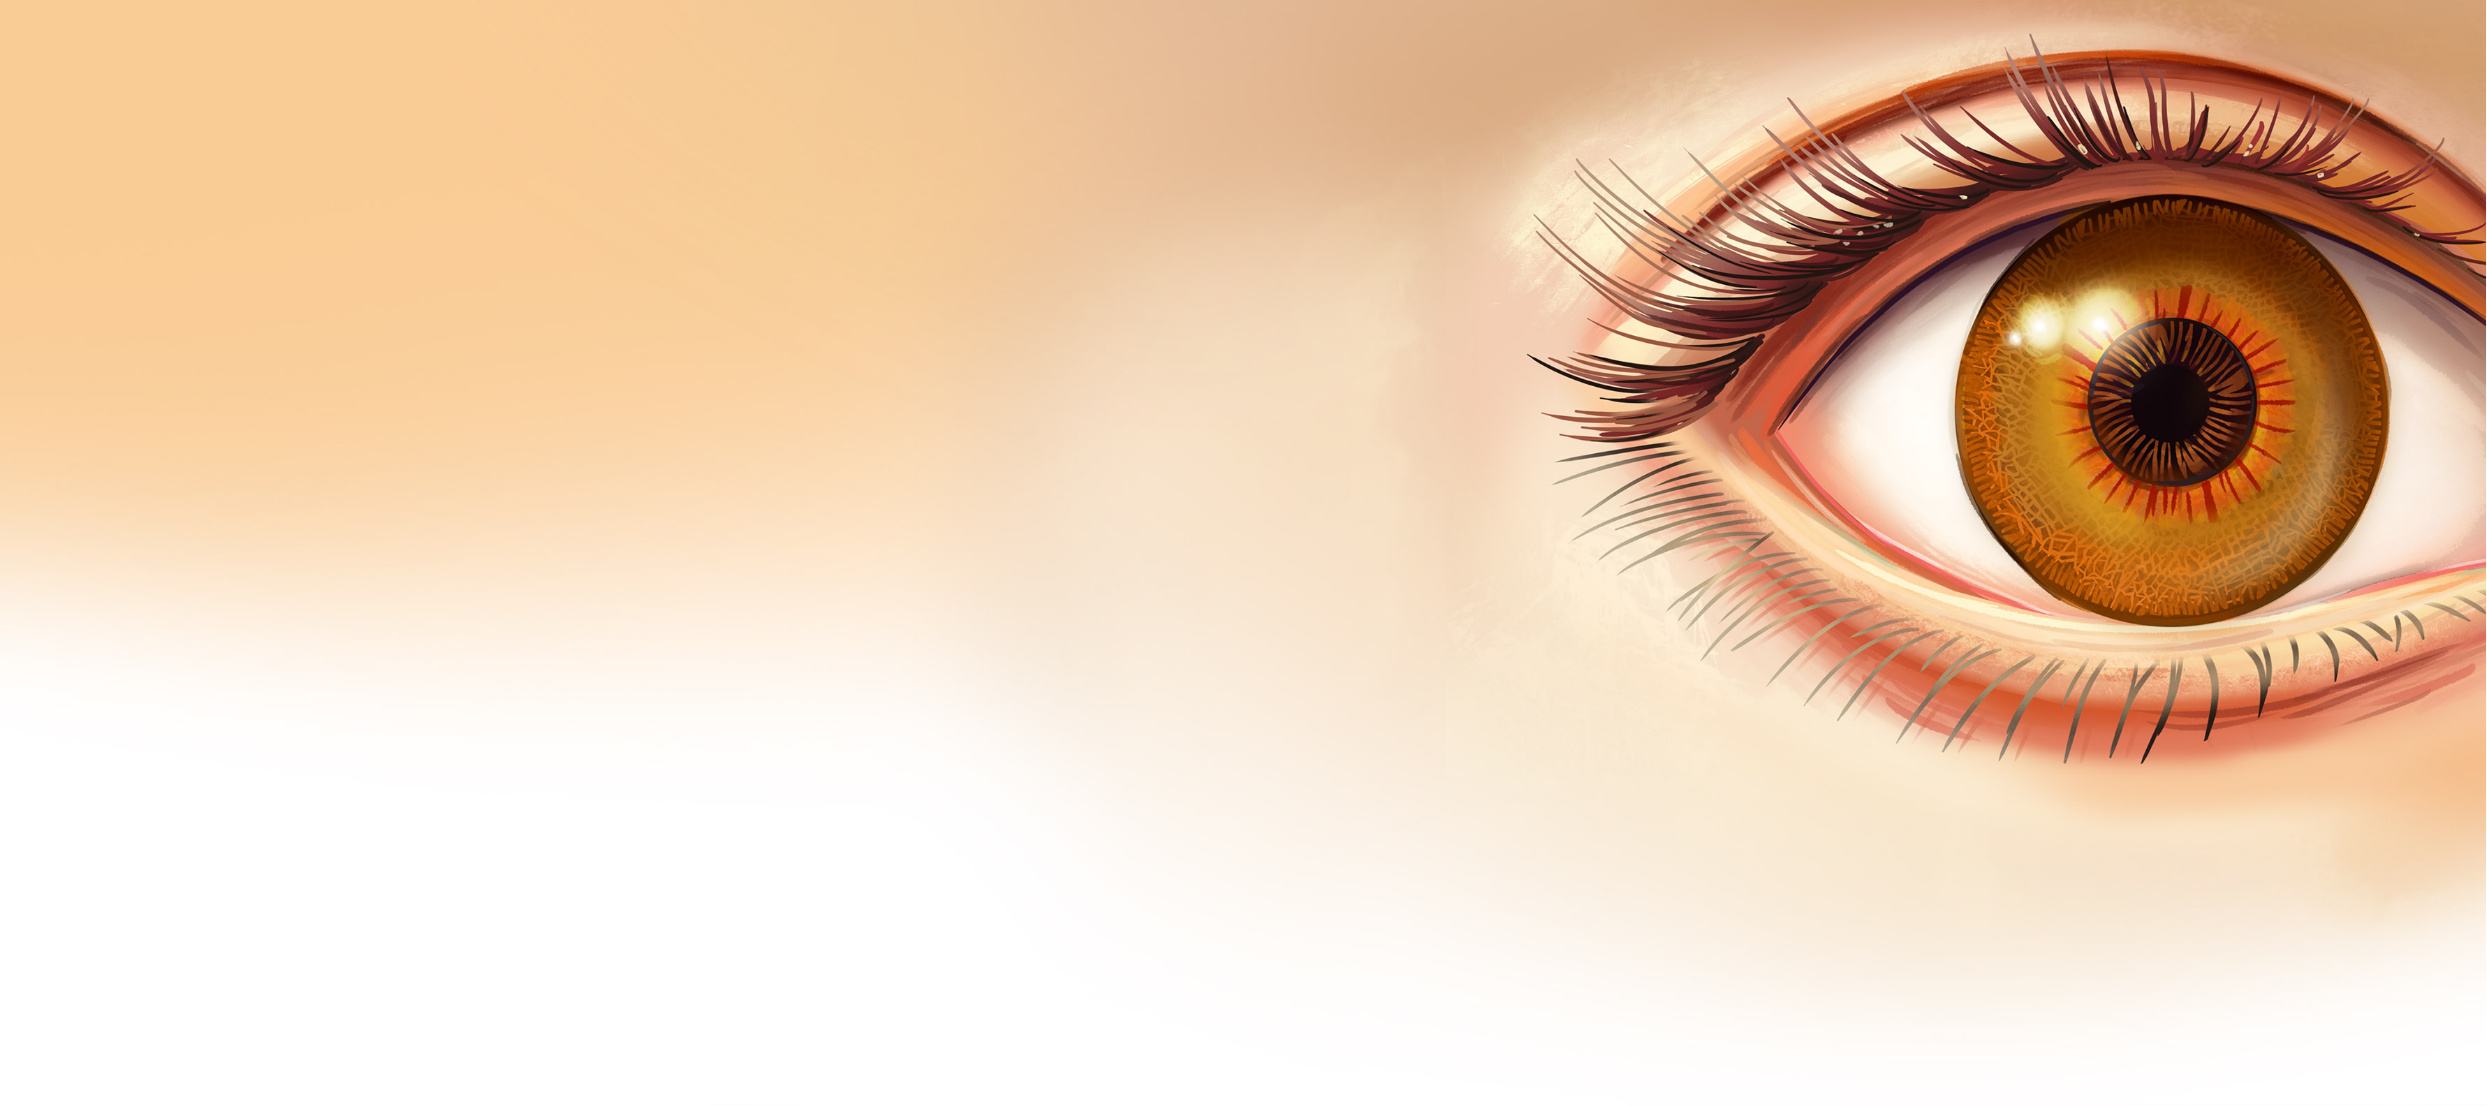 close up of illustrated brown eye with eyelids and eyelashes